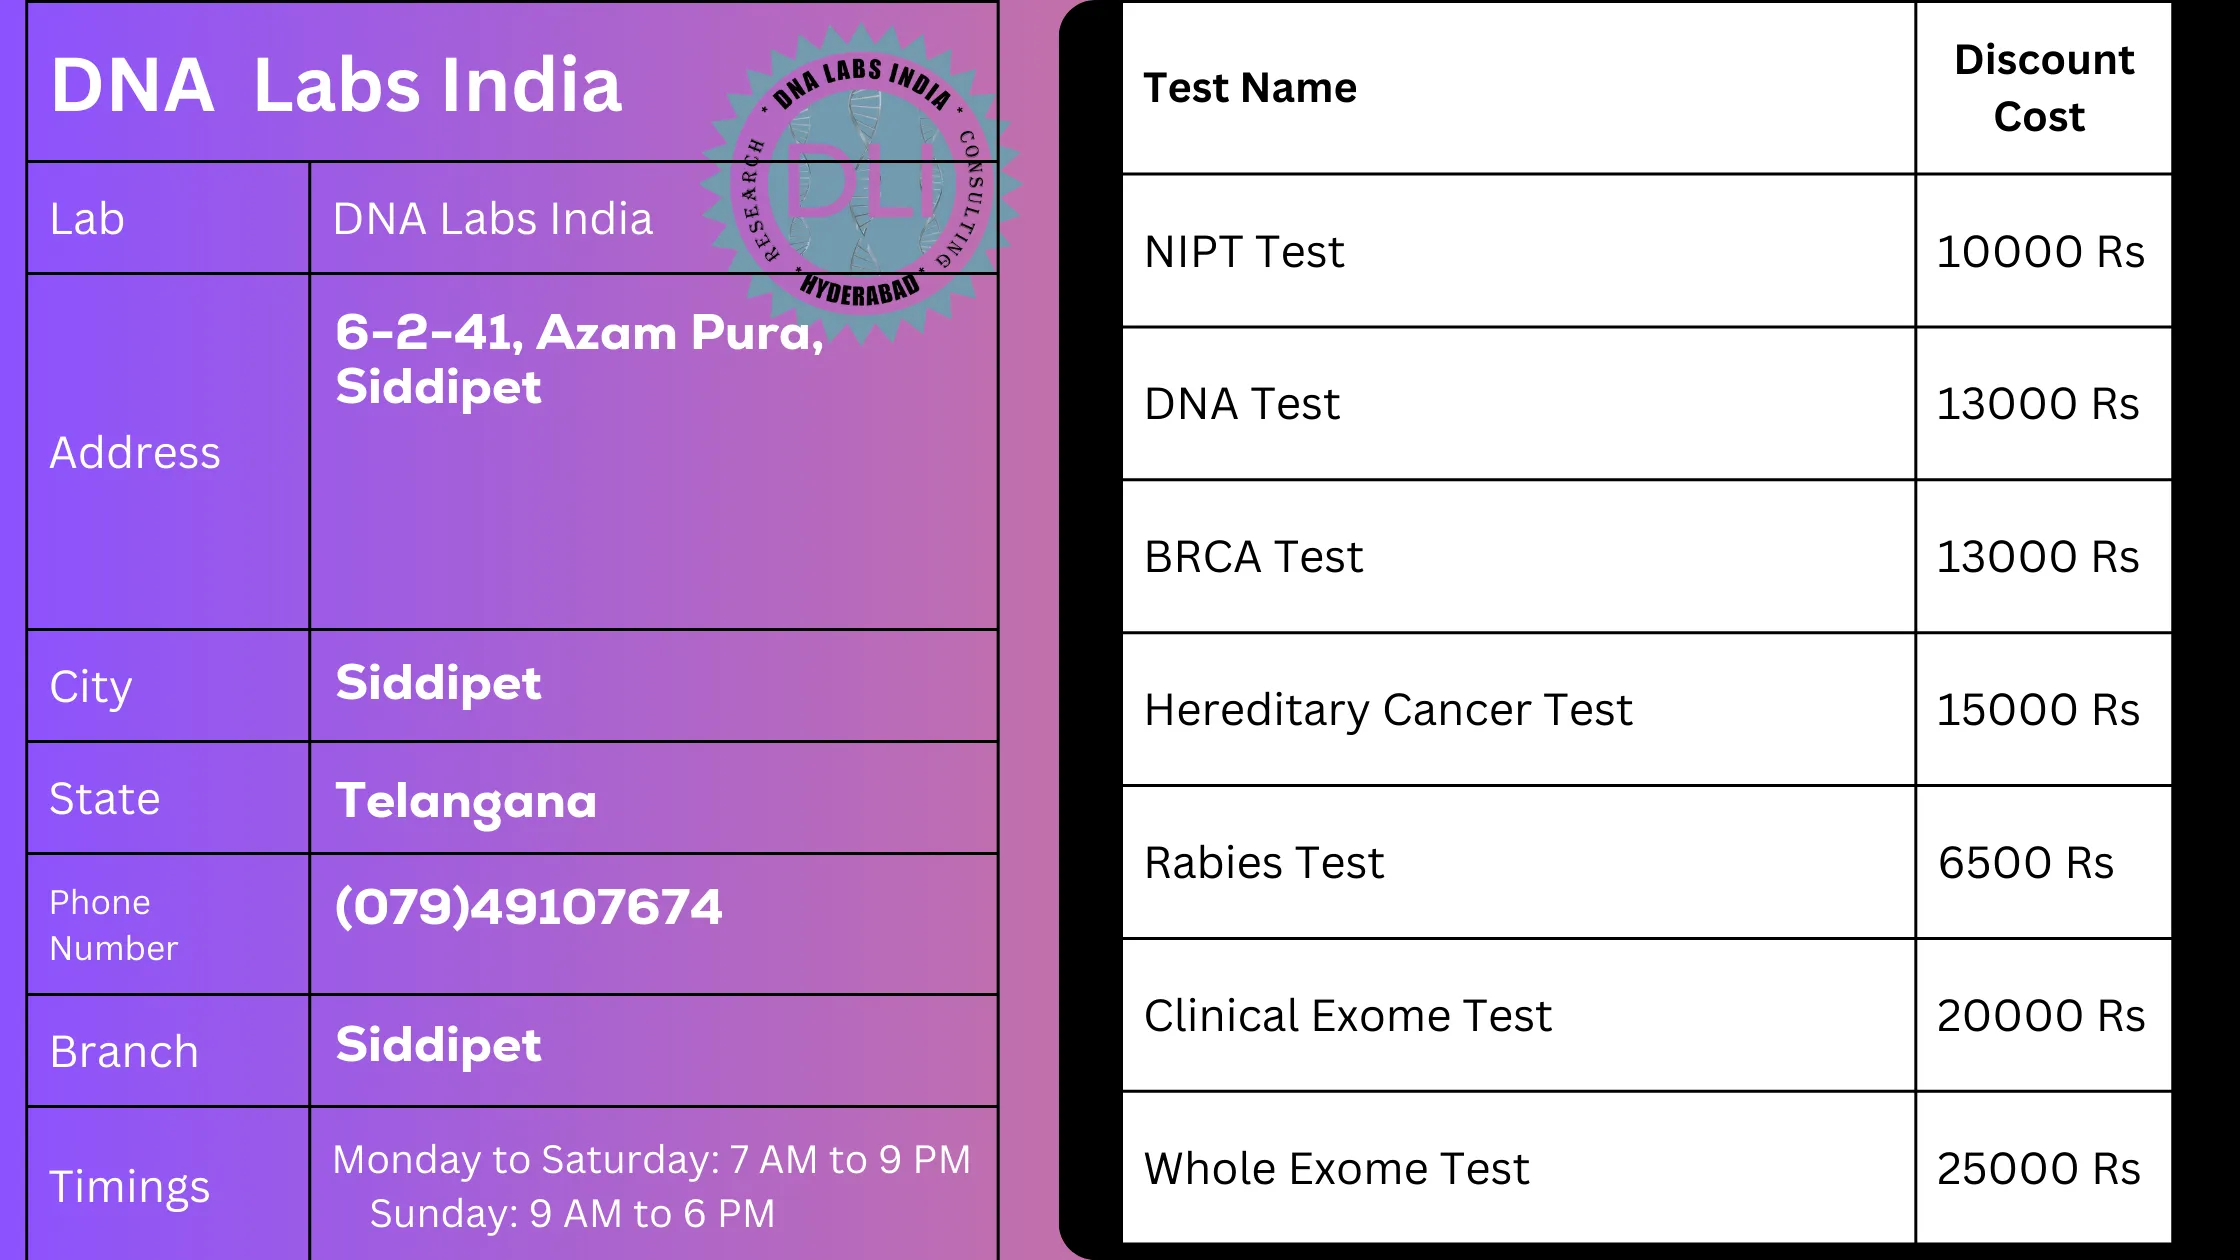 DNA Labs India - Siddipet: Your Trusted Partner for Genetic Testingn